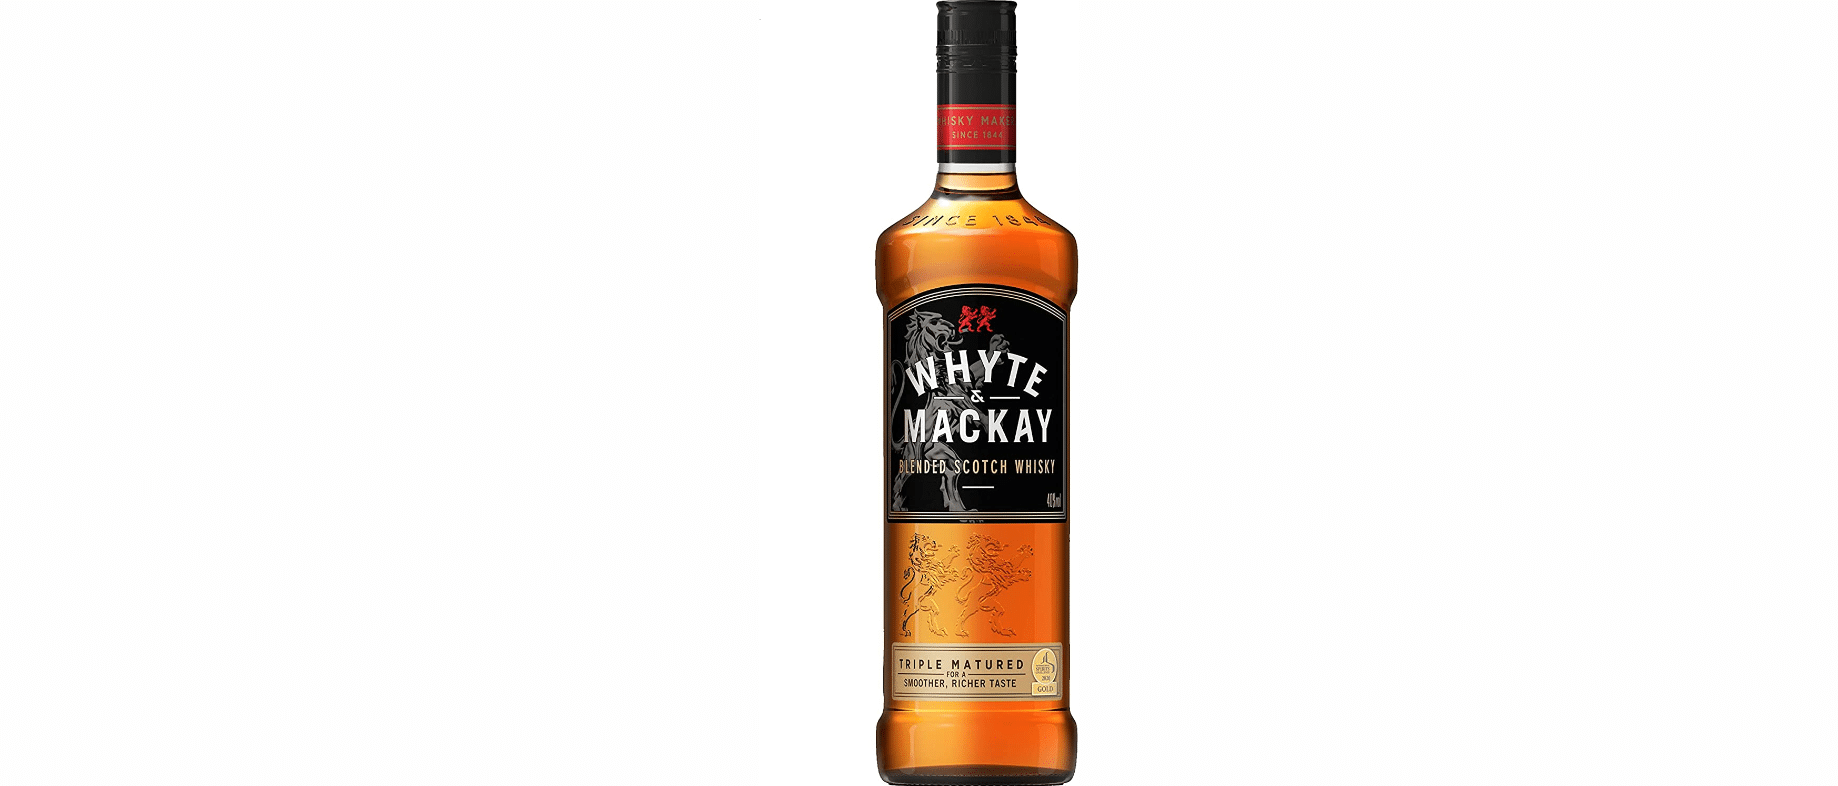 Le Whyte and Mackay